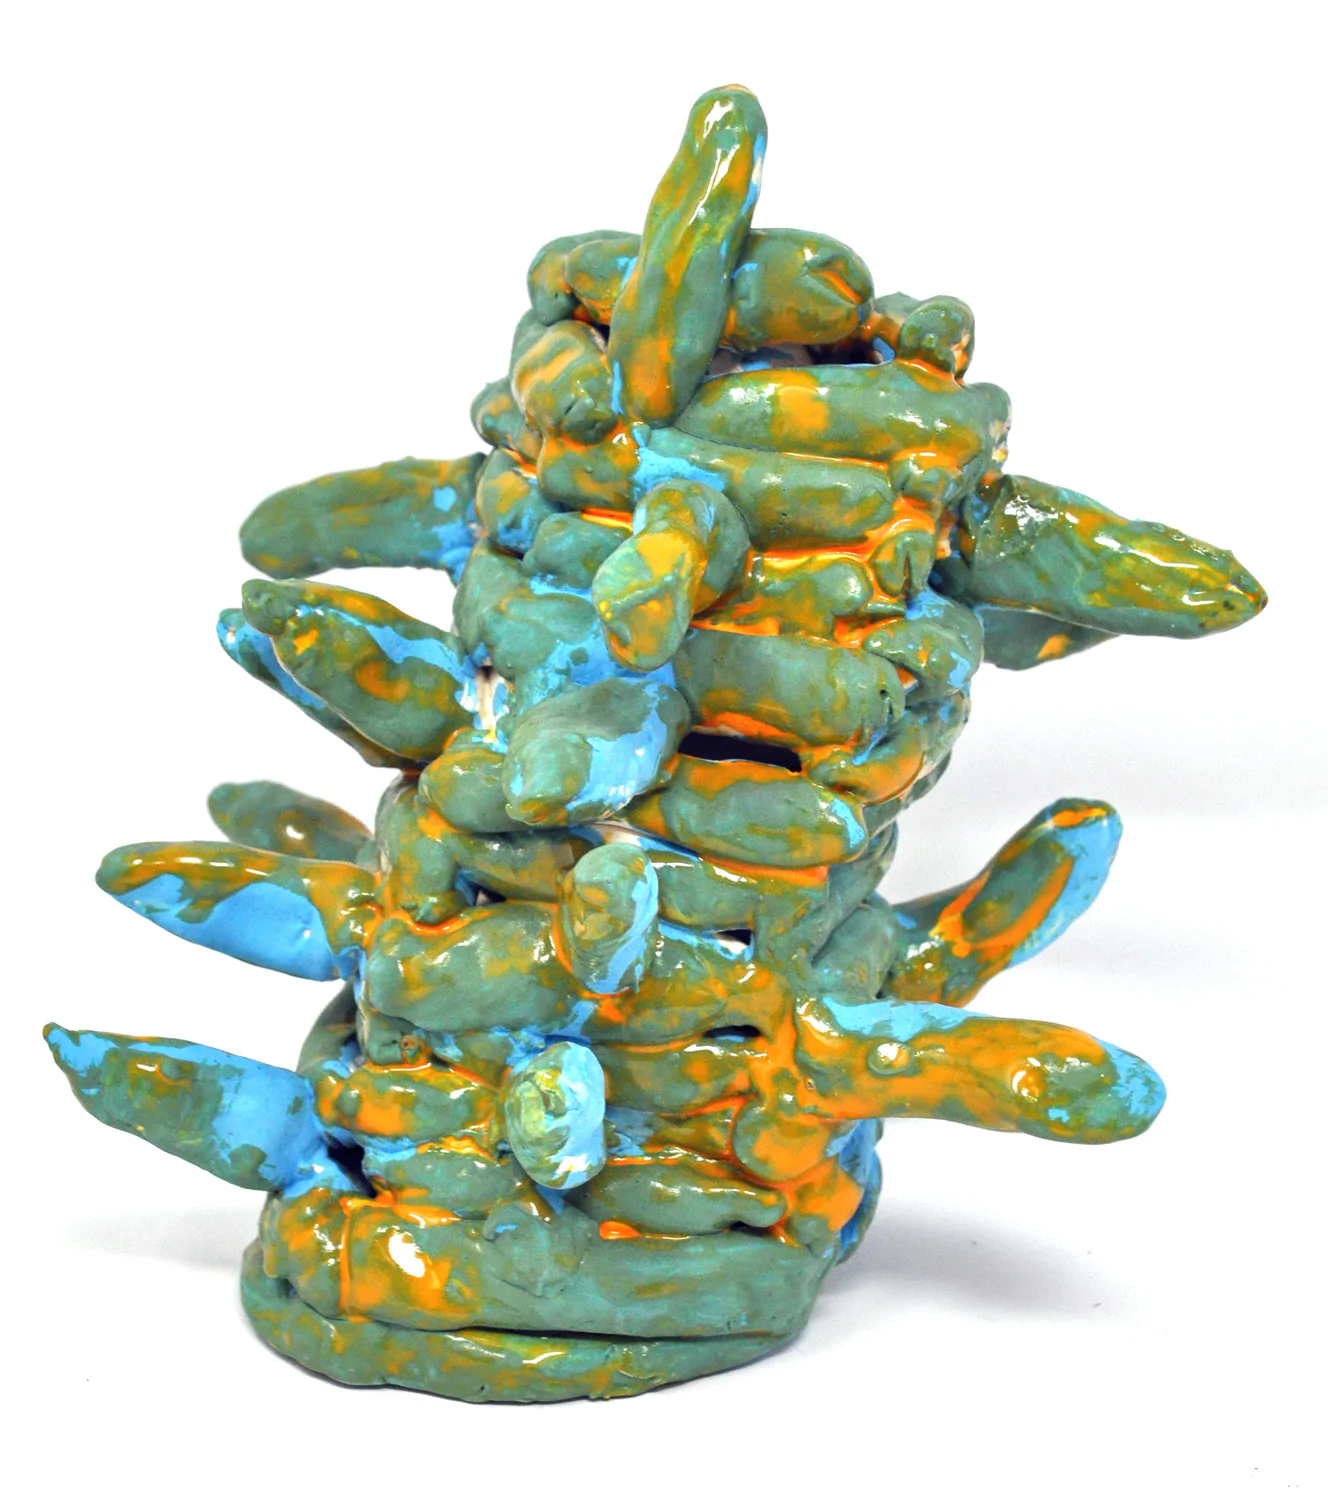 Ceramic tower made of small sections built one on top of the other. Green, blue and yellow glazes were used.